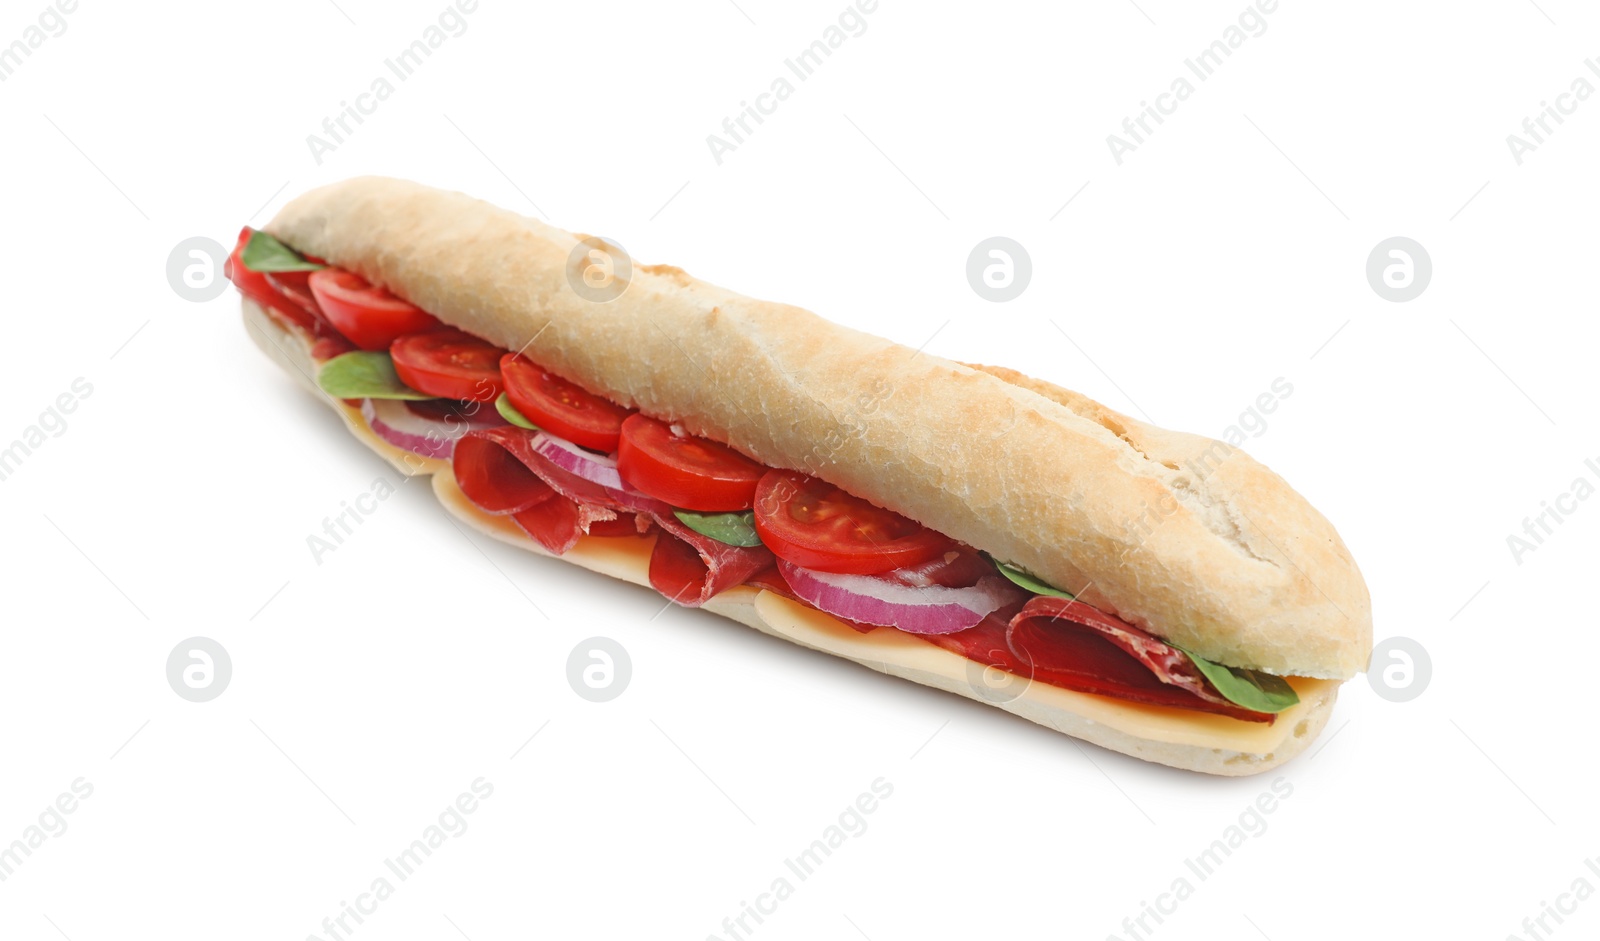 Photo of Delicious sandwich with bresaola, tomato and onion isolated on white